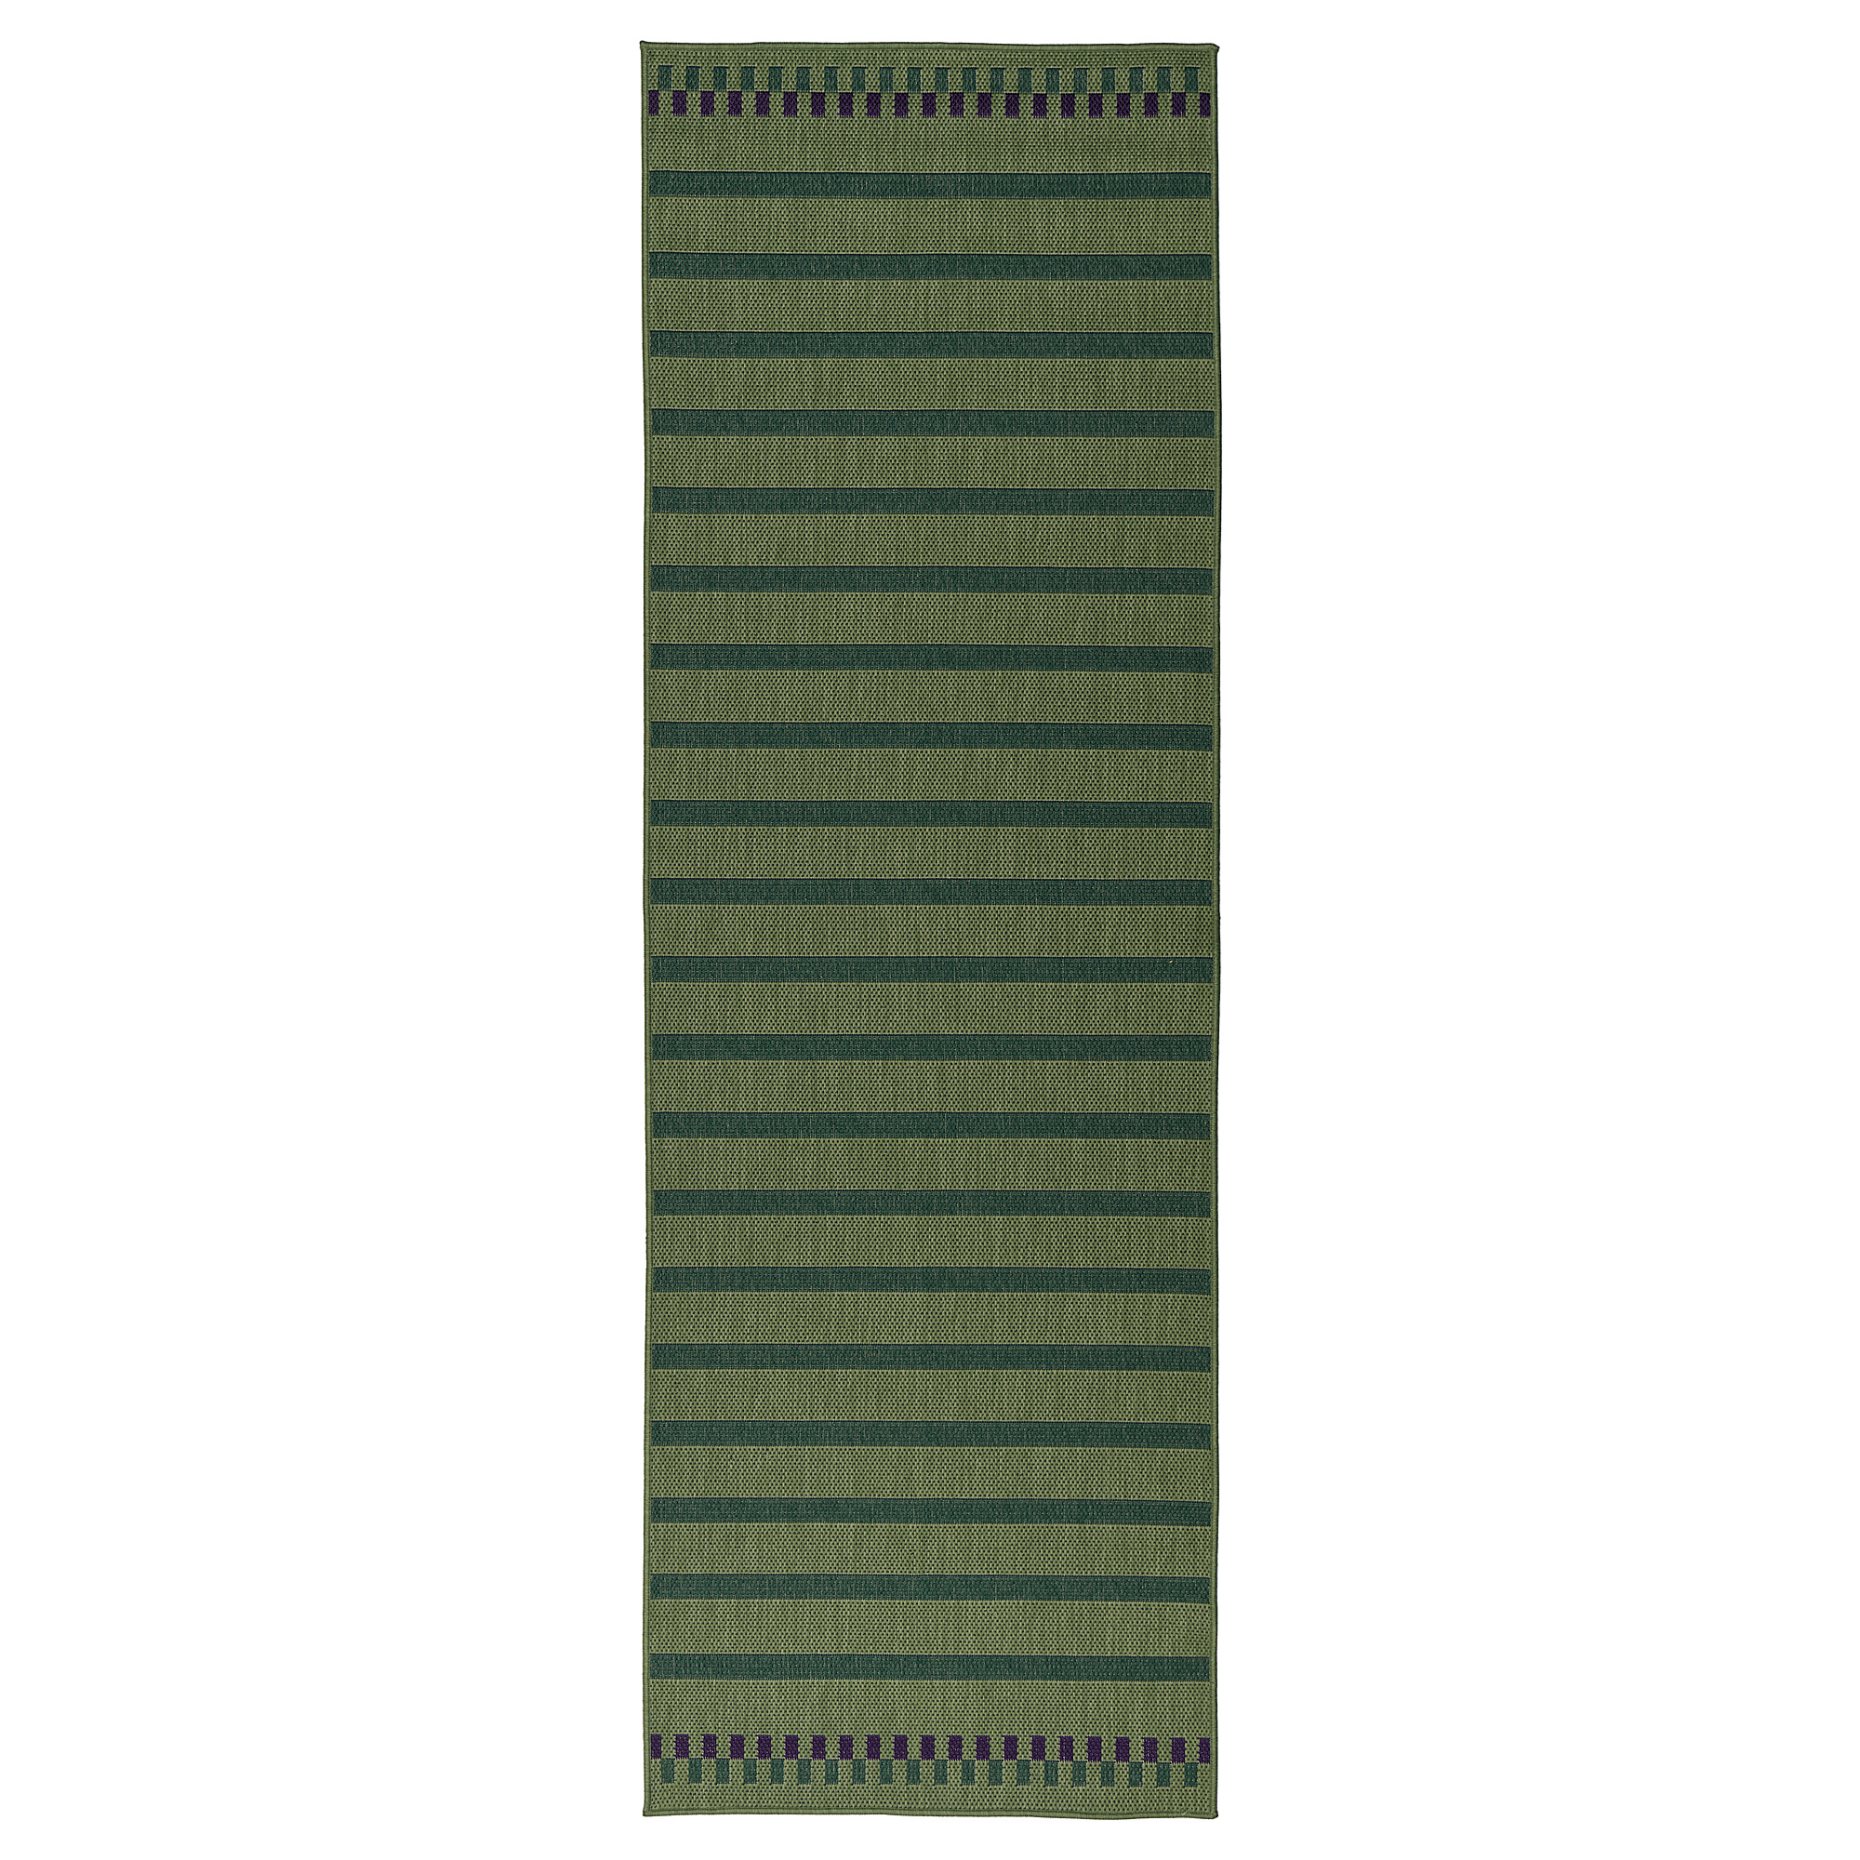 KORSNING, rug flatwoven/striped/in/outdoor, 80x250 cm, 305.532.35